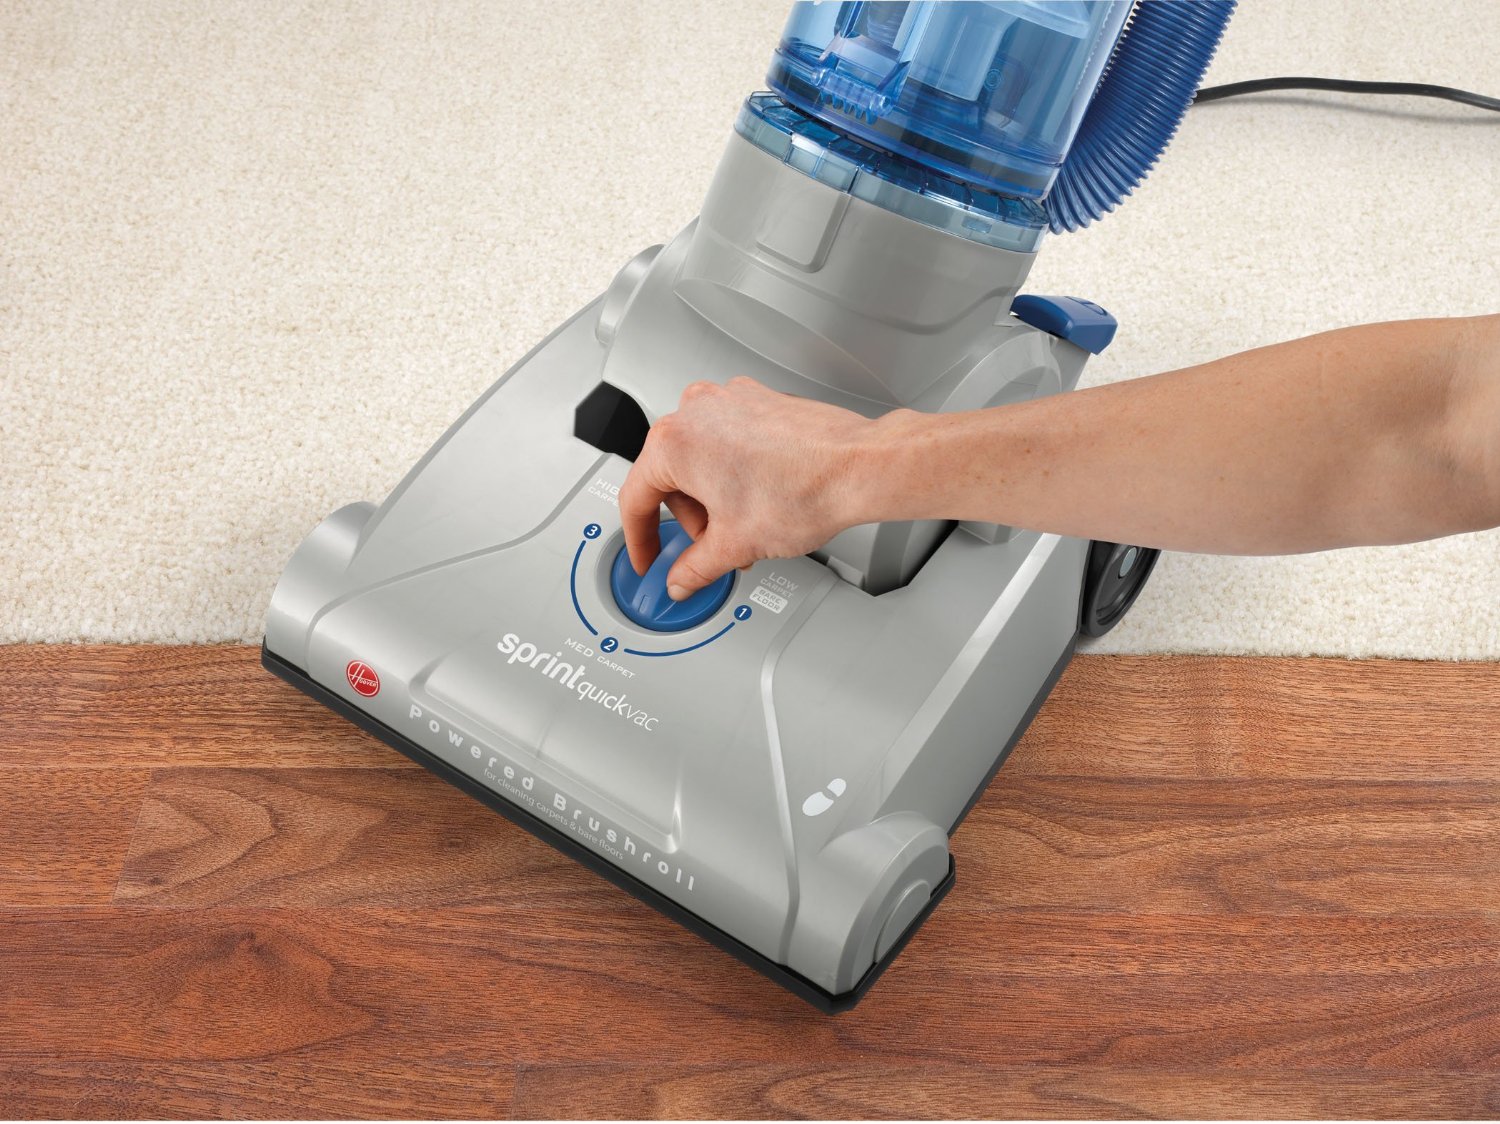 Hoover Sprint QuickVac bagless upright vacuum for $42